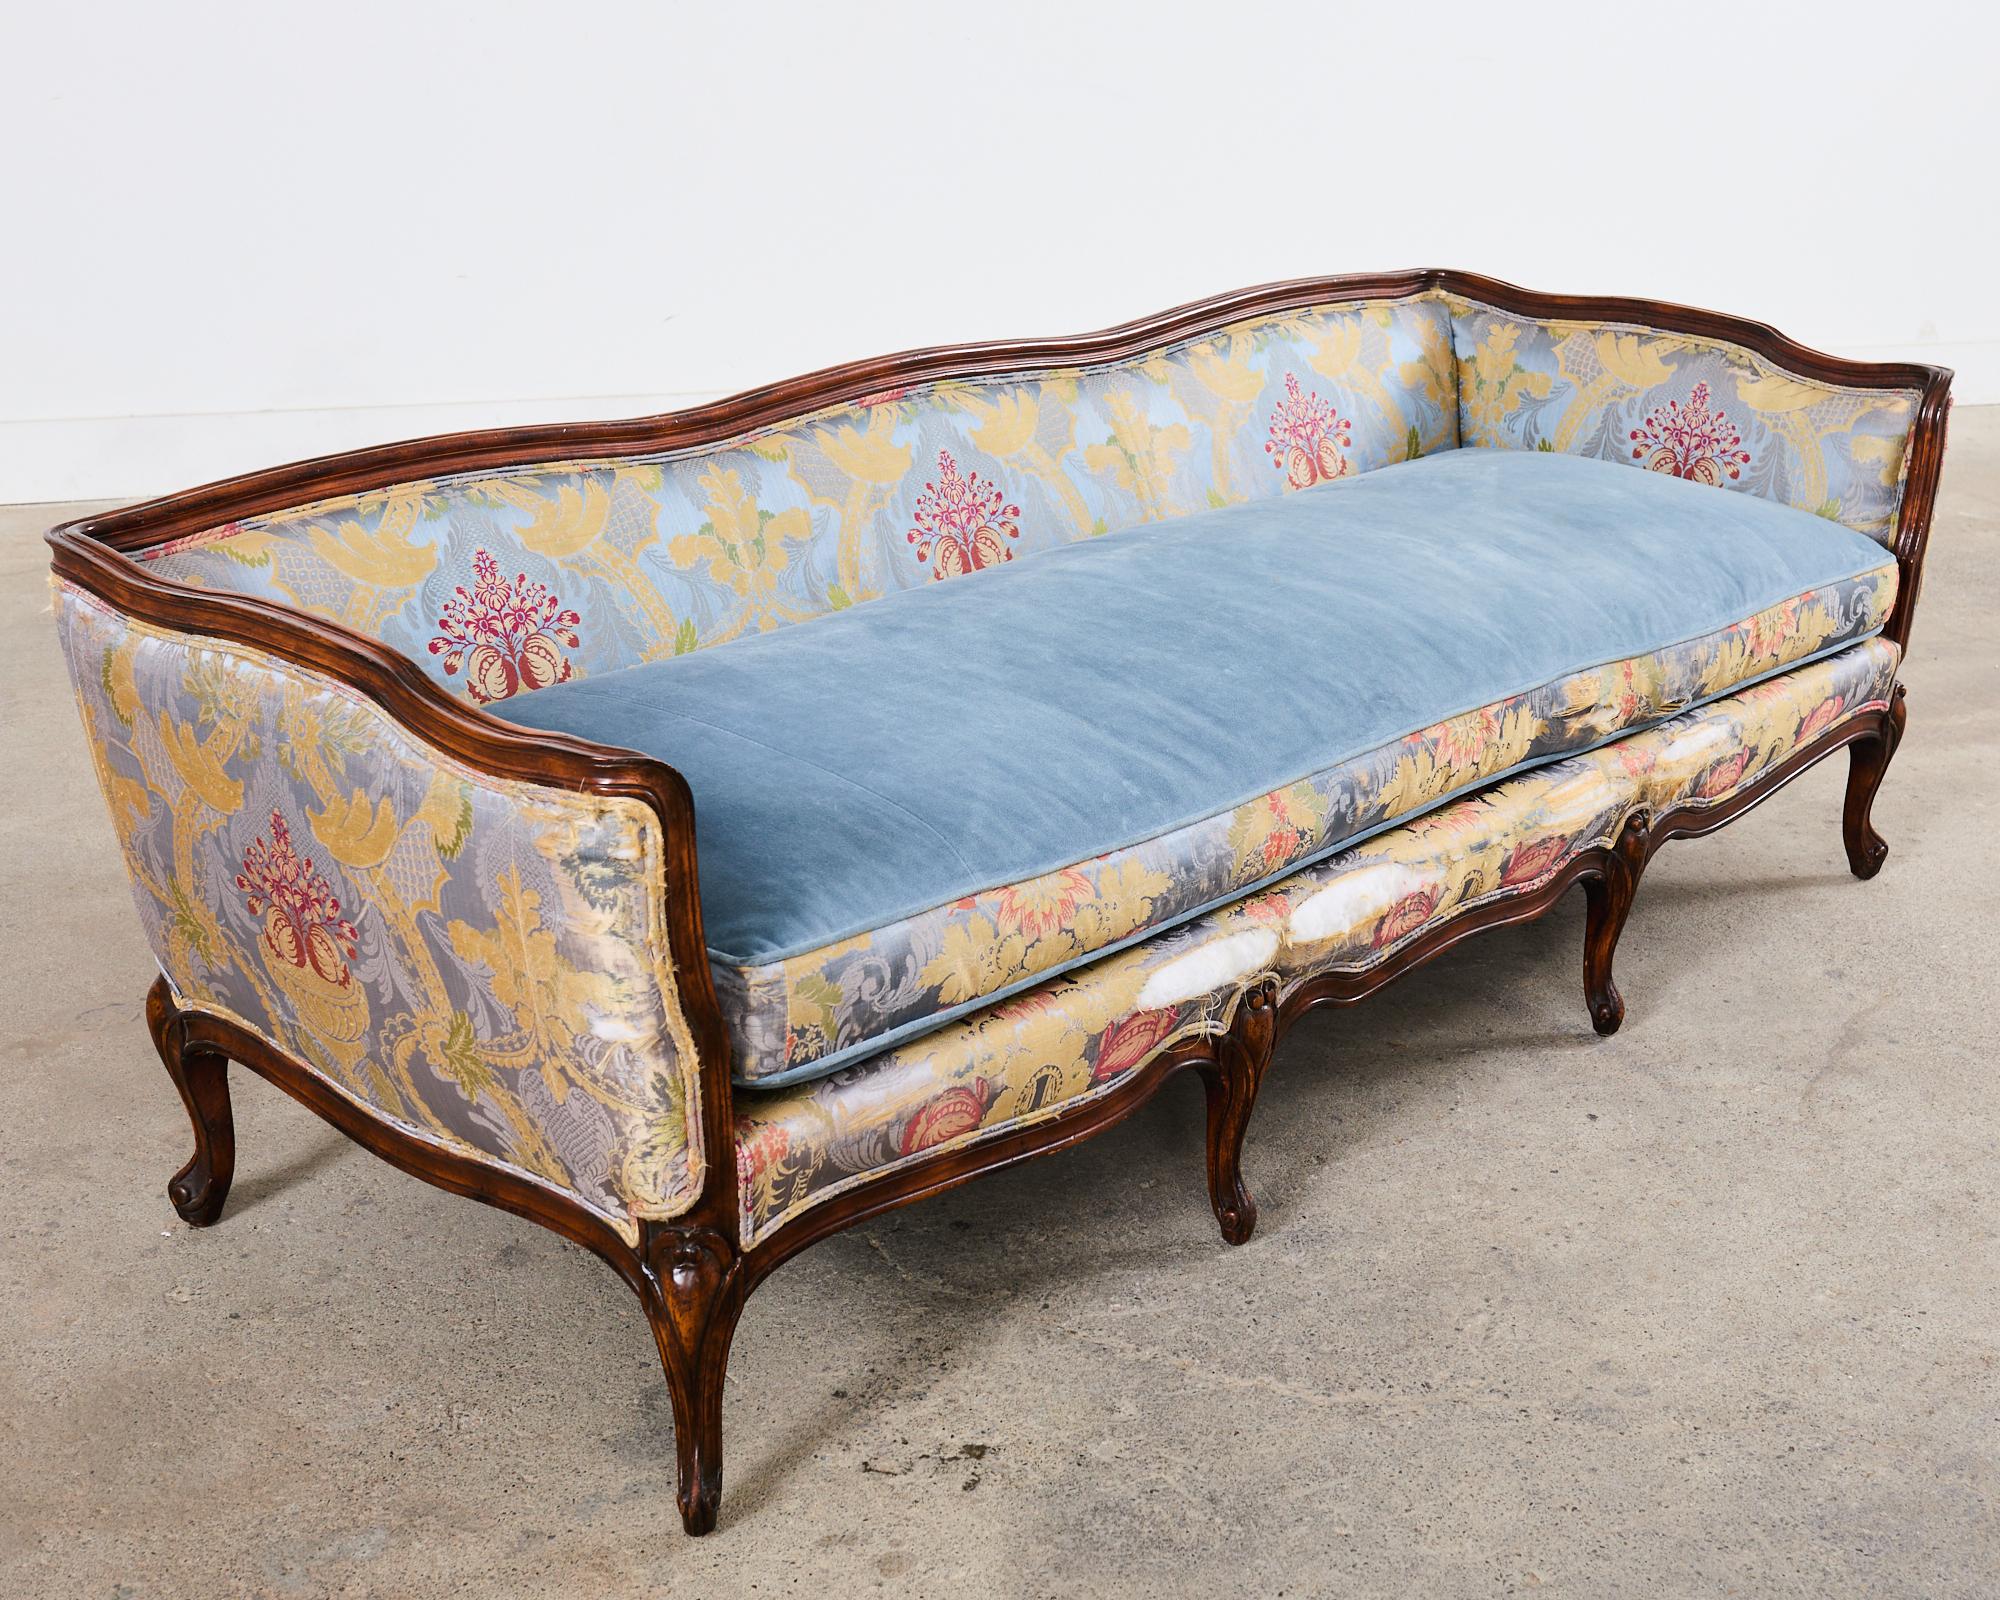 20th Century French Provincial Louis XV Style Serpentine Canape Sofa Settee For Sale